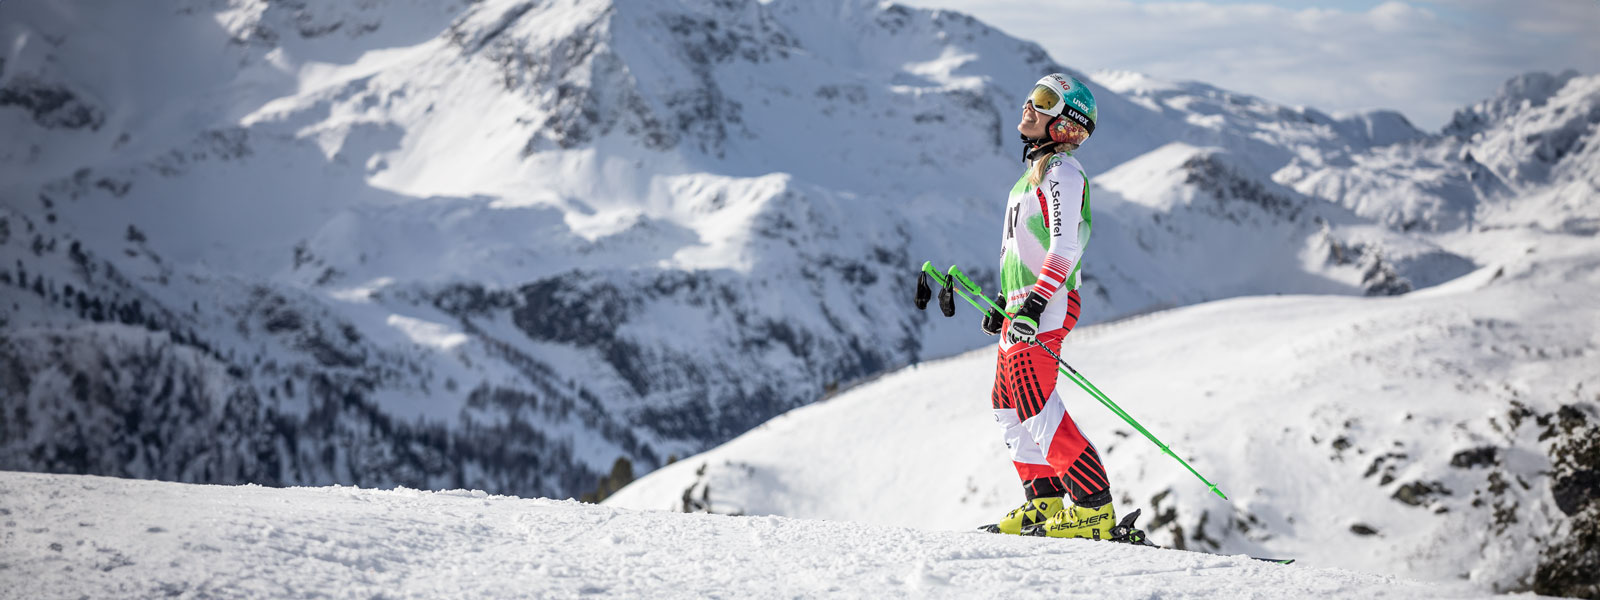 Ski driver in a red and white racing suit is smiling and with the sticks in her hands in front of a huge mountain range